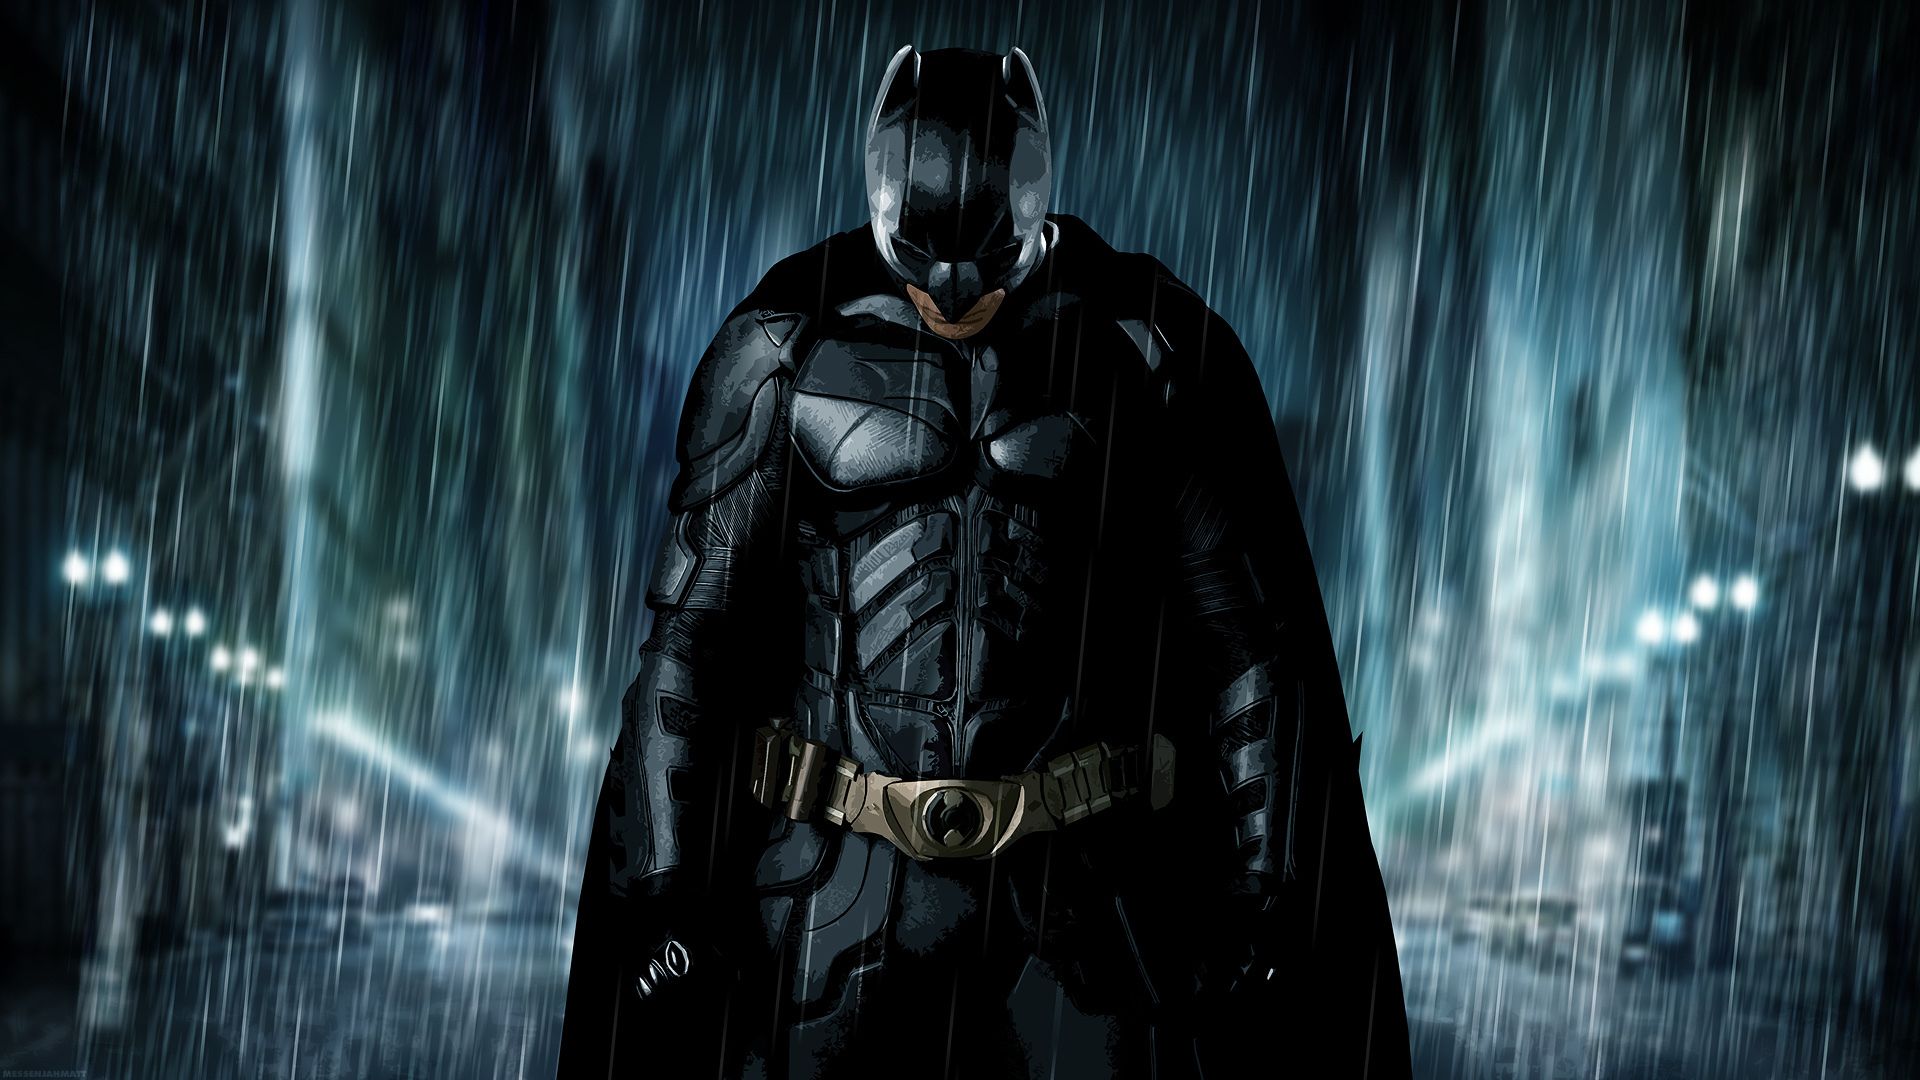 Dark Knight Movie HD Wallpaper And Movie Images, New Wallpapers